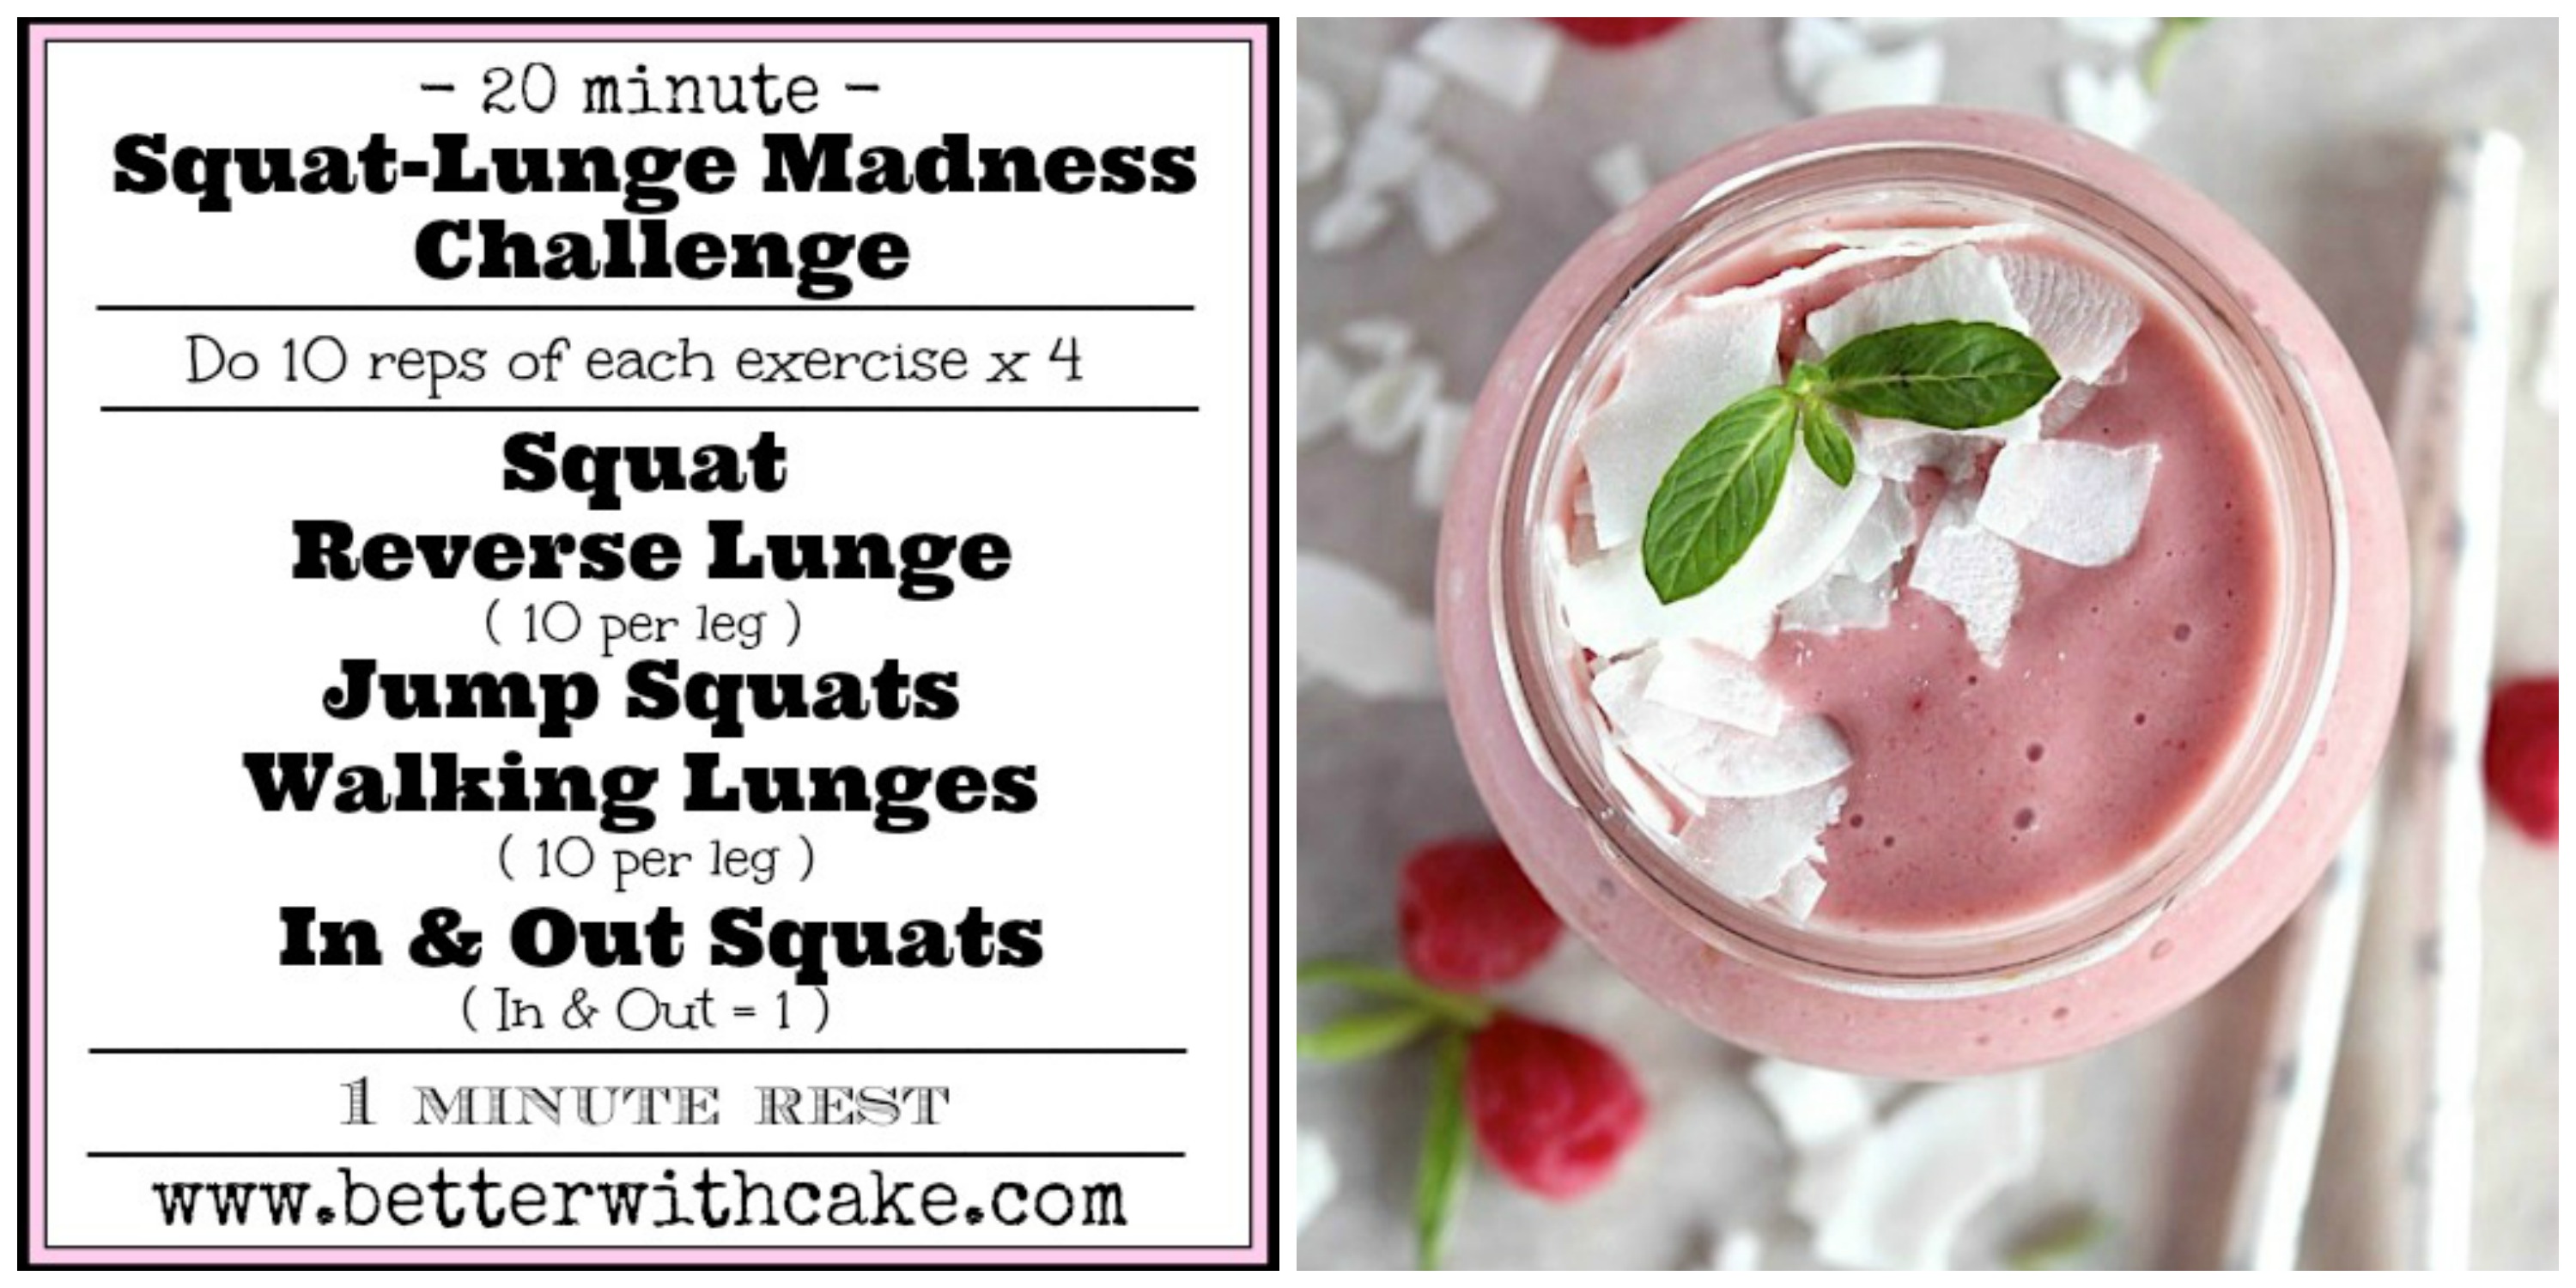 Fit Friday Fun – a 20 Minute Squat-Lunge Madness Challenge & A Bonus Peach and Raspberry Coconut Dream Smoothie Recipe